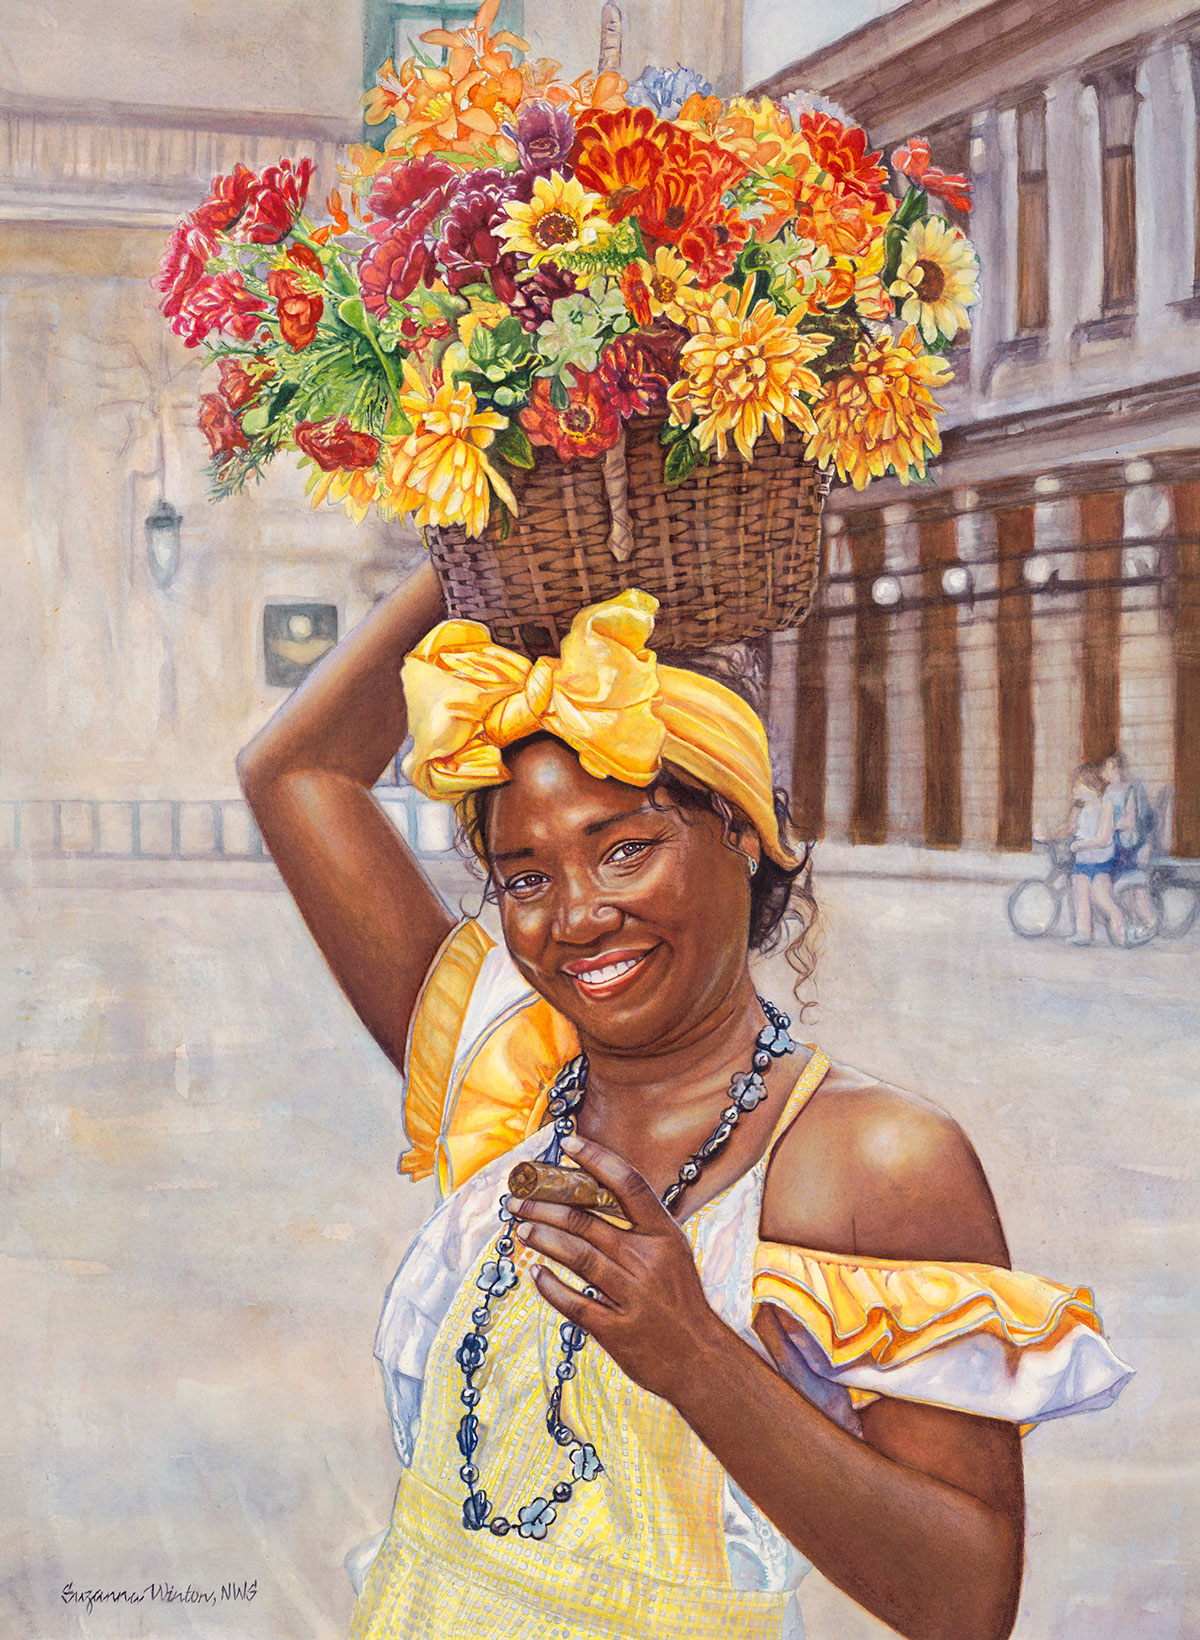 Woman with flower basket